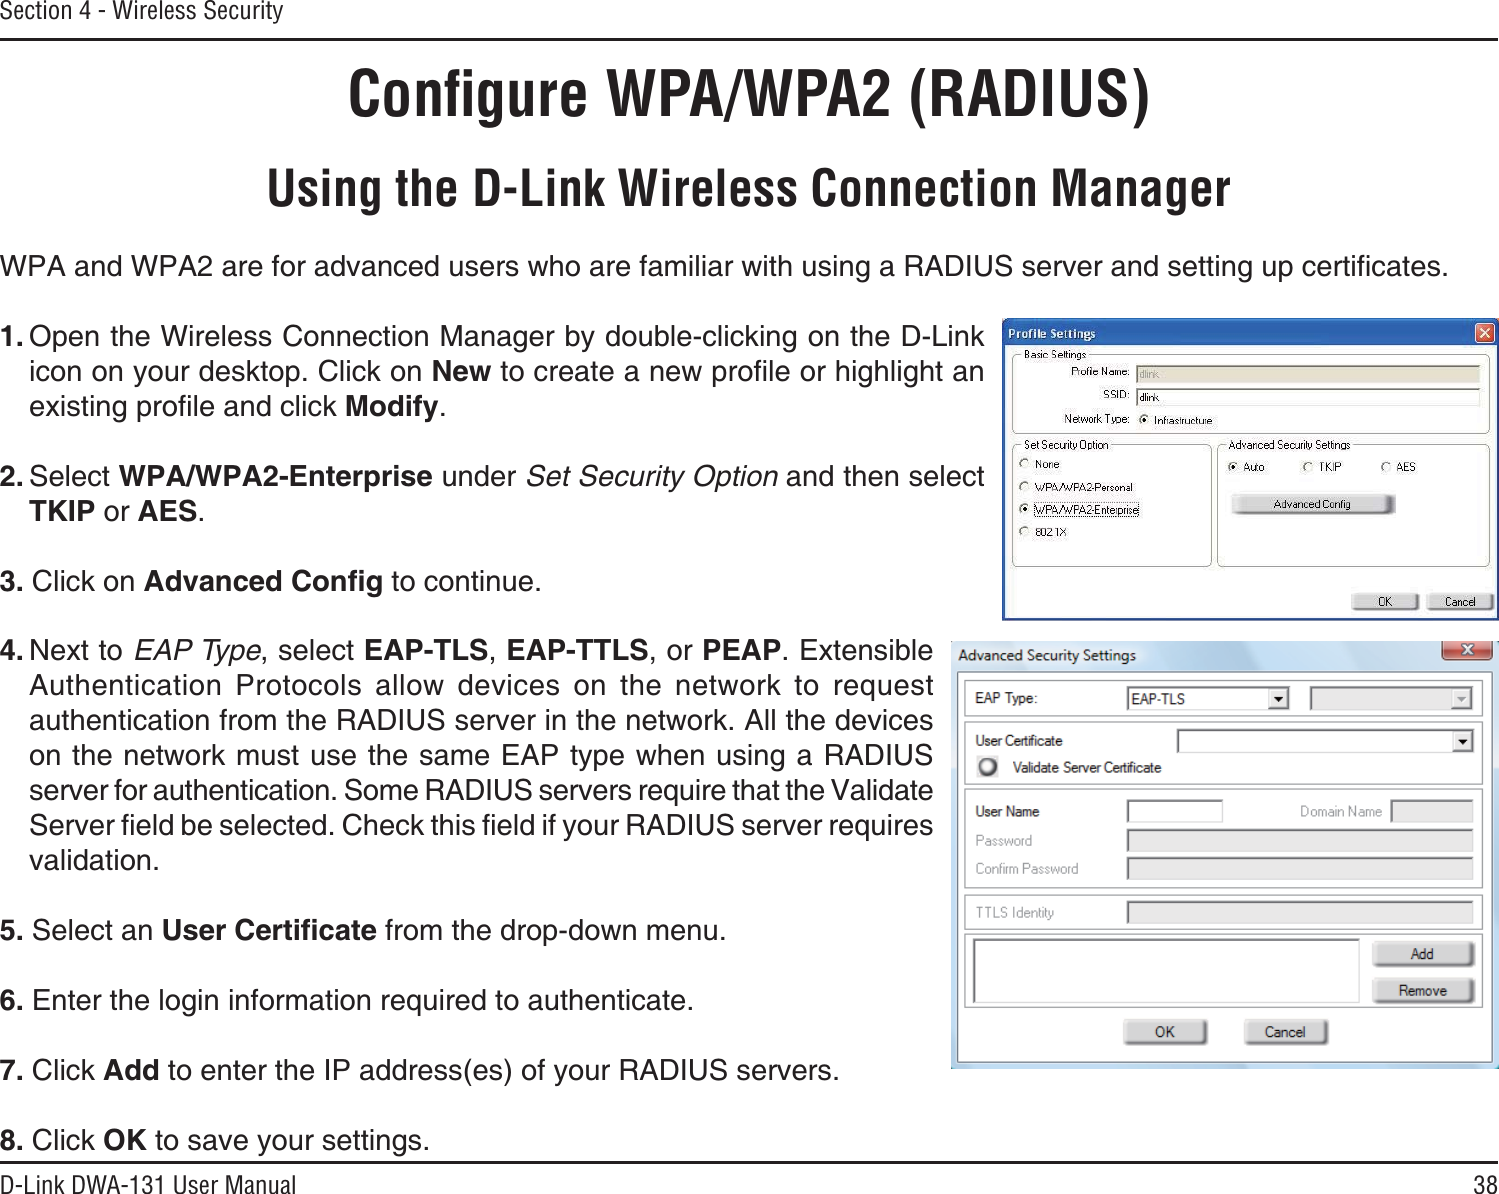 38D-Link DWA-131 User ManualSection 4 - Wireless SecurityConﬁgure WPA/WPA2 (RADIUS)Using the D-Link Wireless Connection Manager92#CPF92#CTGHQTCFXCPEGFWUGTUYJQCTGHCOKNKCTYKVJWUKPIC4#&amp;+75UGTXGTCPFUGVVKPIWREGTVKſECVGU1. Open the Wireless Connection Manager by double-clicking on the D-Link icon on your desktop. Click on NewVQETGCVGCPGYRTQſNGQTJKIJNKIJVCPGZKUVKPIRTQſNGCPFENKEM/QFKH[.2. Select 92#92#&apos;PVGTRTKUG under Set Security Option and then select TKIP or AES.3. Click on #FXCPEGF%QPſI to continue.4. Next to EAP Type, select &apos;#26.5,&apos;#266.5, or PEAP. Extensible Authentication Protocols allow devices on the network to request authentication from the RADIUS server in the network. All the devices on the network must use the same EAP type when using a RADIUS server for authentication. Some RADIUS servers require that the Validate 5GTXGTſGNFDGUGNGEVGF%JGEMVJKUſGNFKH[QWT4#&amp;+75UGTXGTTGSWKTGUvalidation.5. Select an 7UGT%GTVKſECVG from the drop-down menu.6. Enter the login information required to authenticate.7. Click Add to enter the IP address(es) of your RADIUS servers.8. Click OK to save your settings.